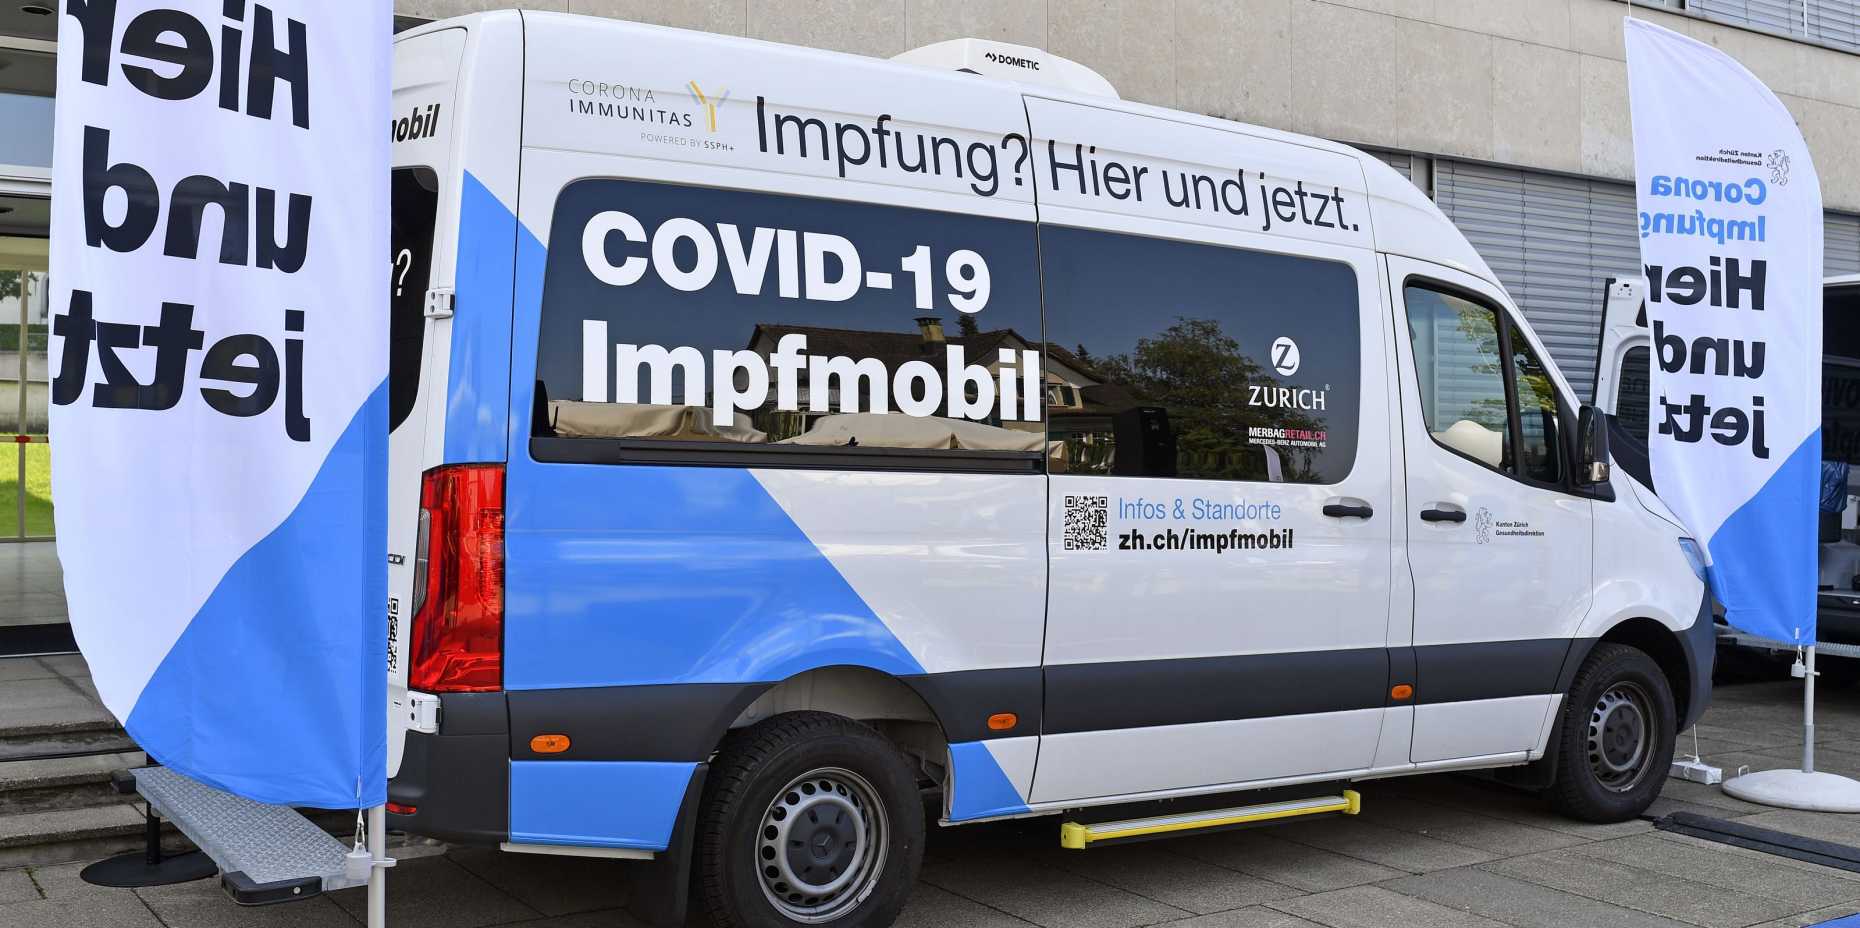 COVID-19 vaccine bus from the Canton of Zurich.